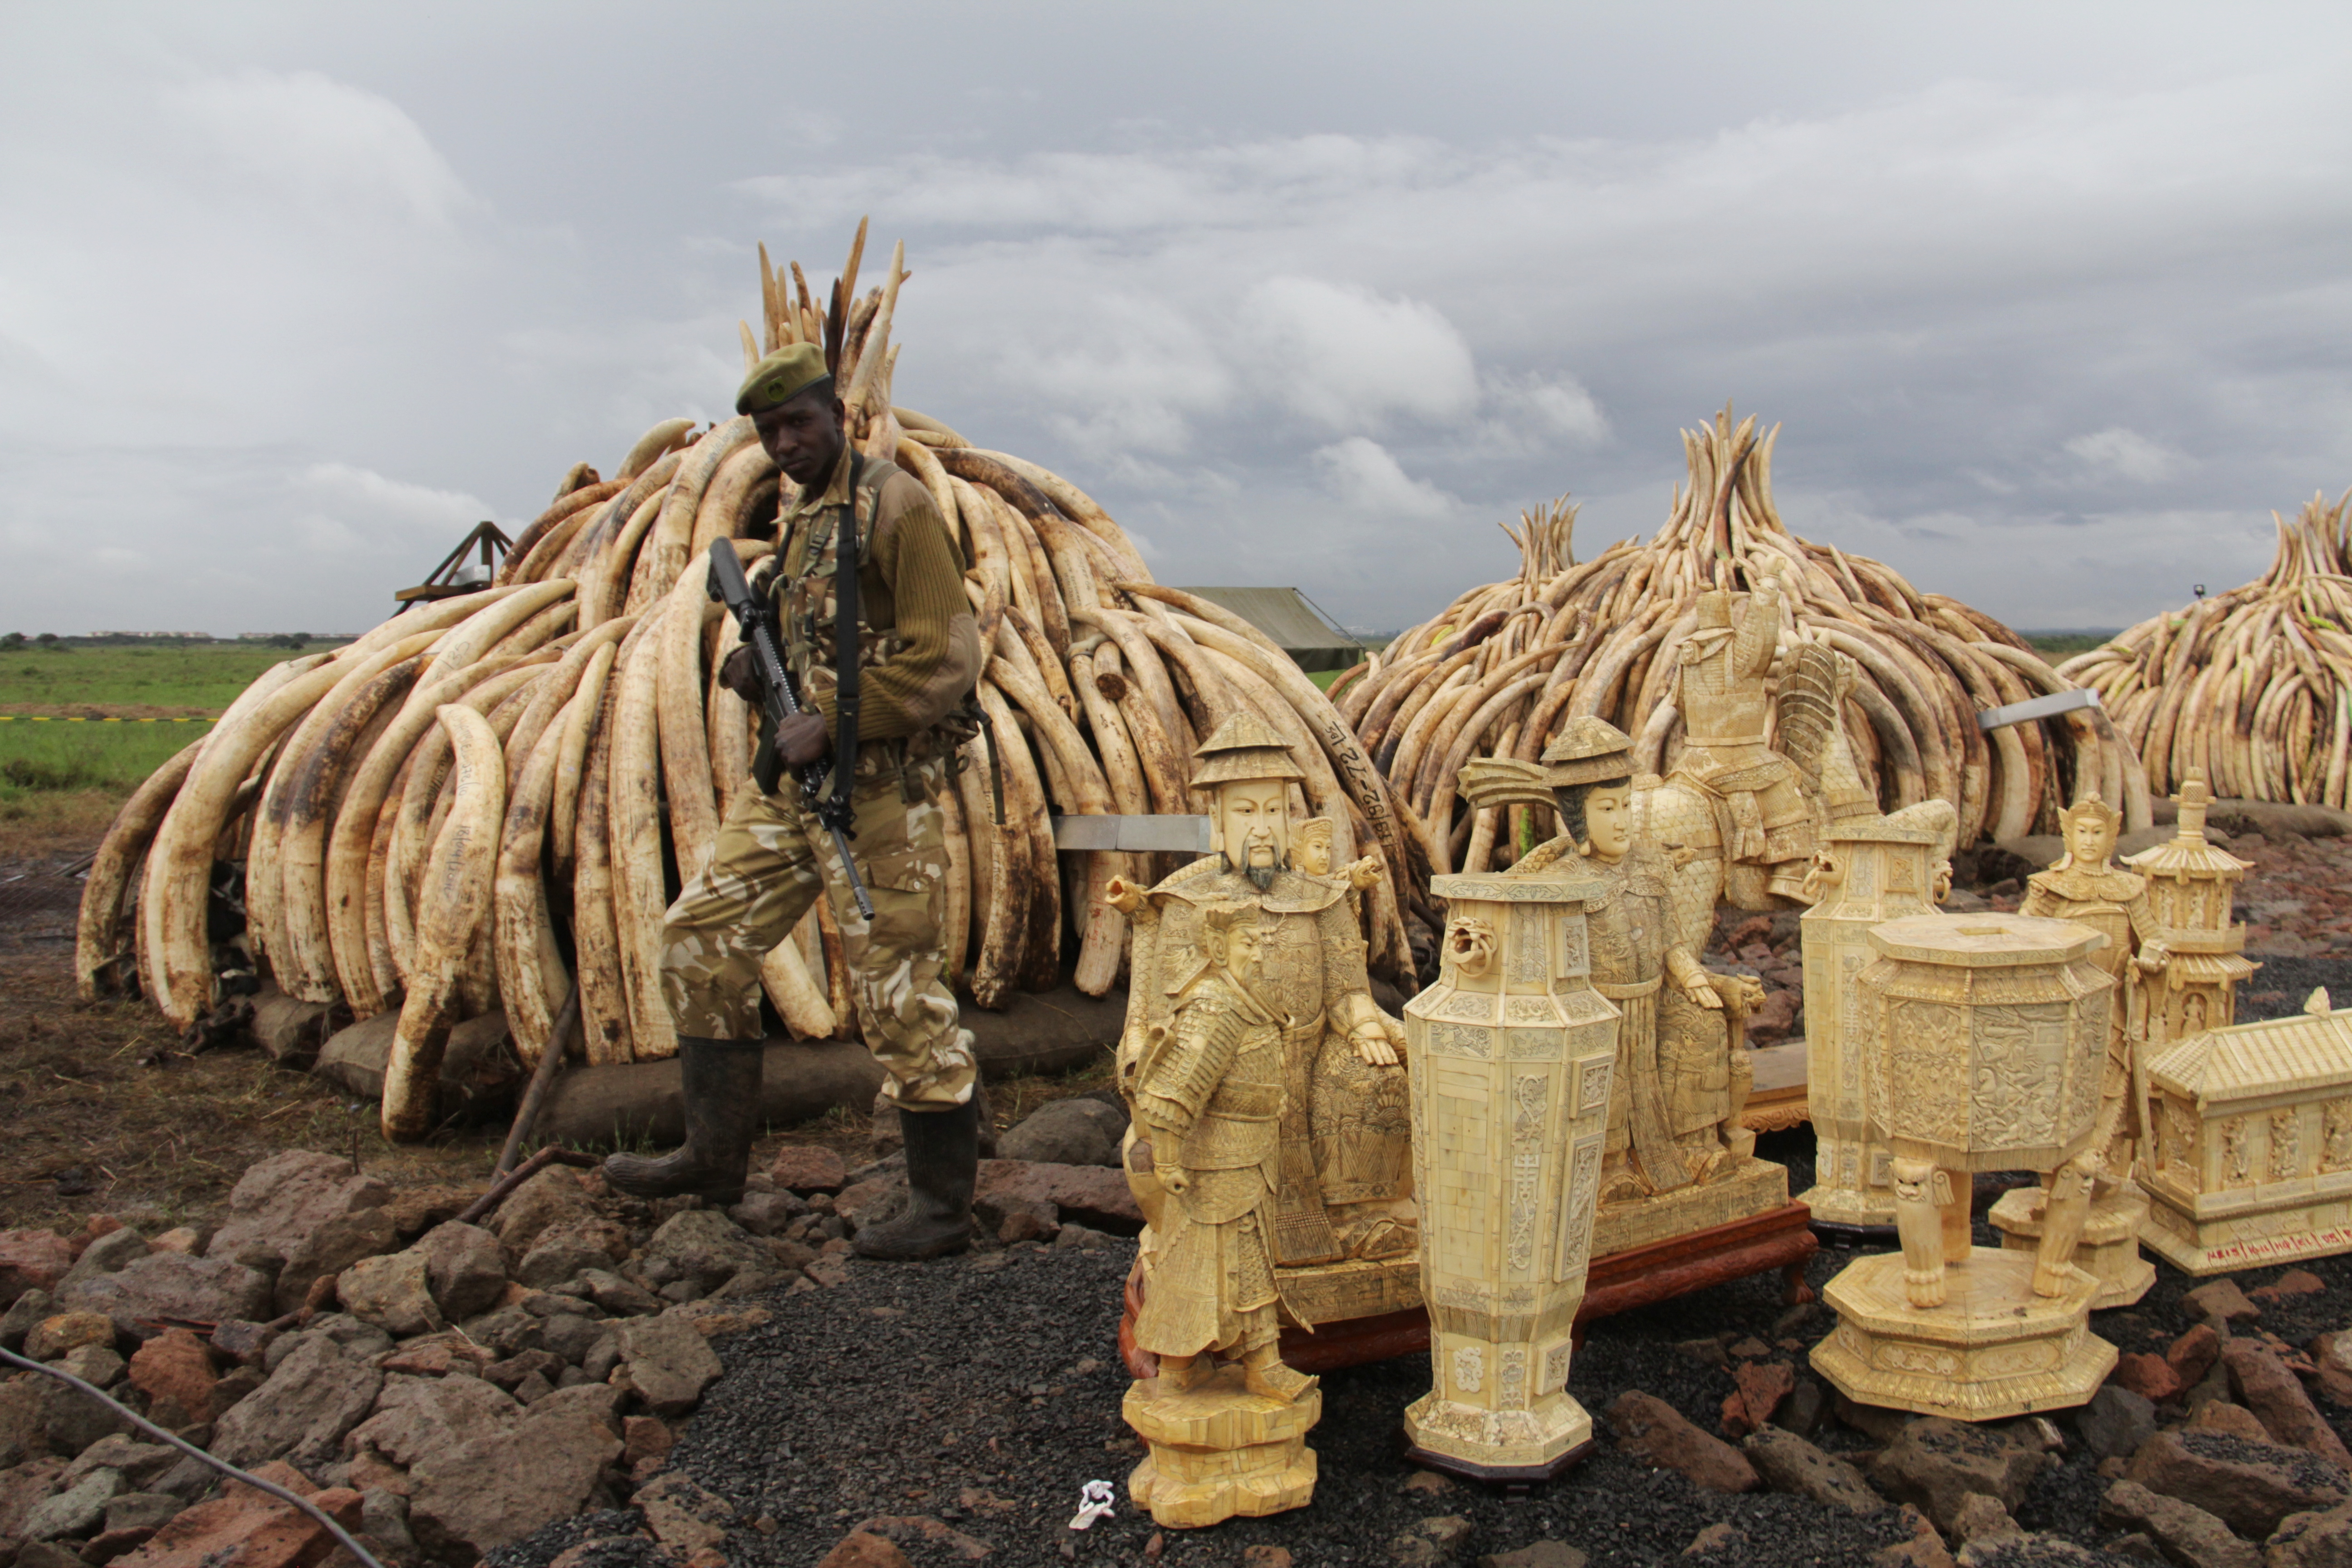 On an empty field inside the park at the KWS, ten stockpiles of ivory lay next to each other/MIKE KARIUKI